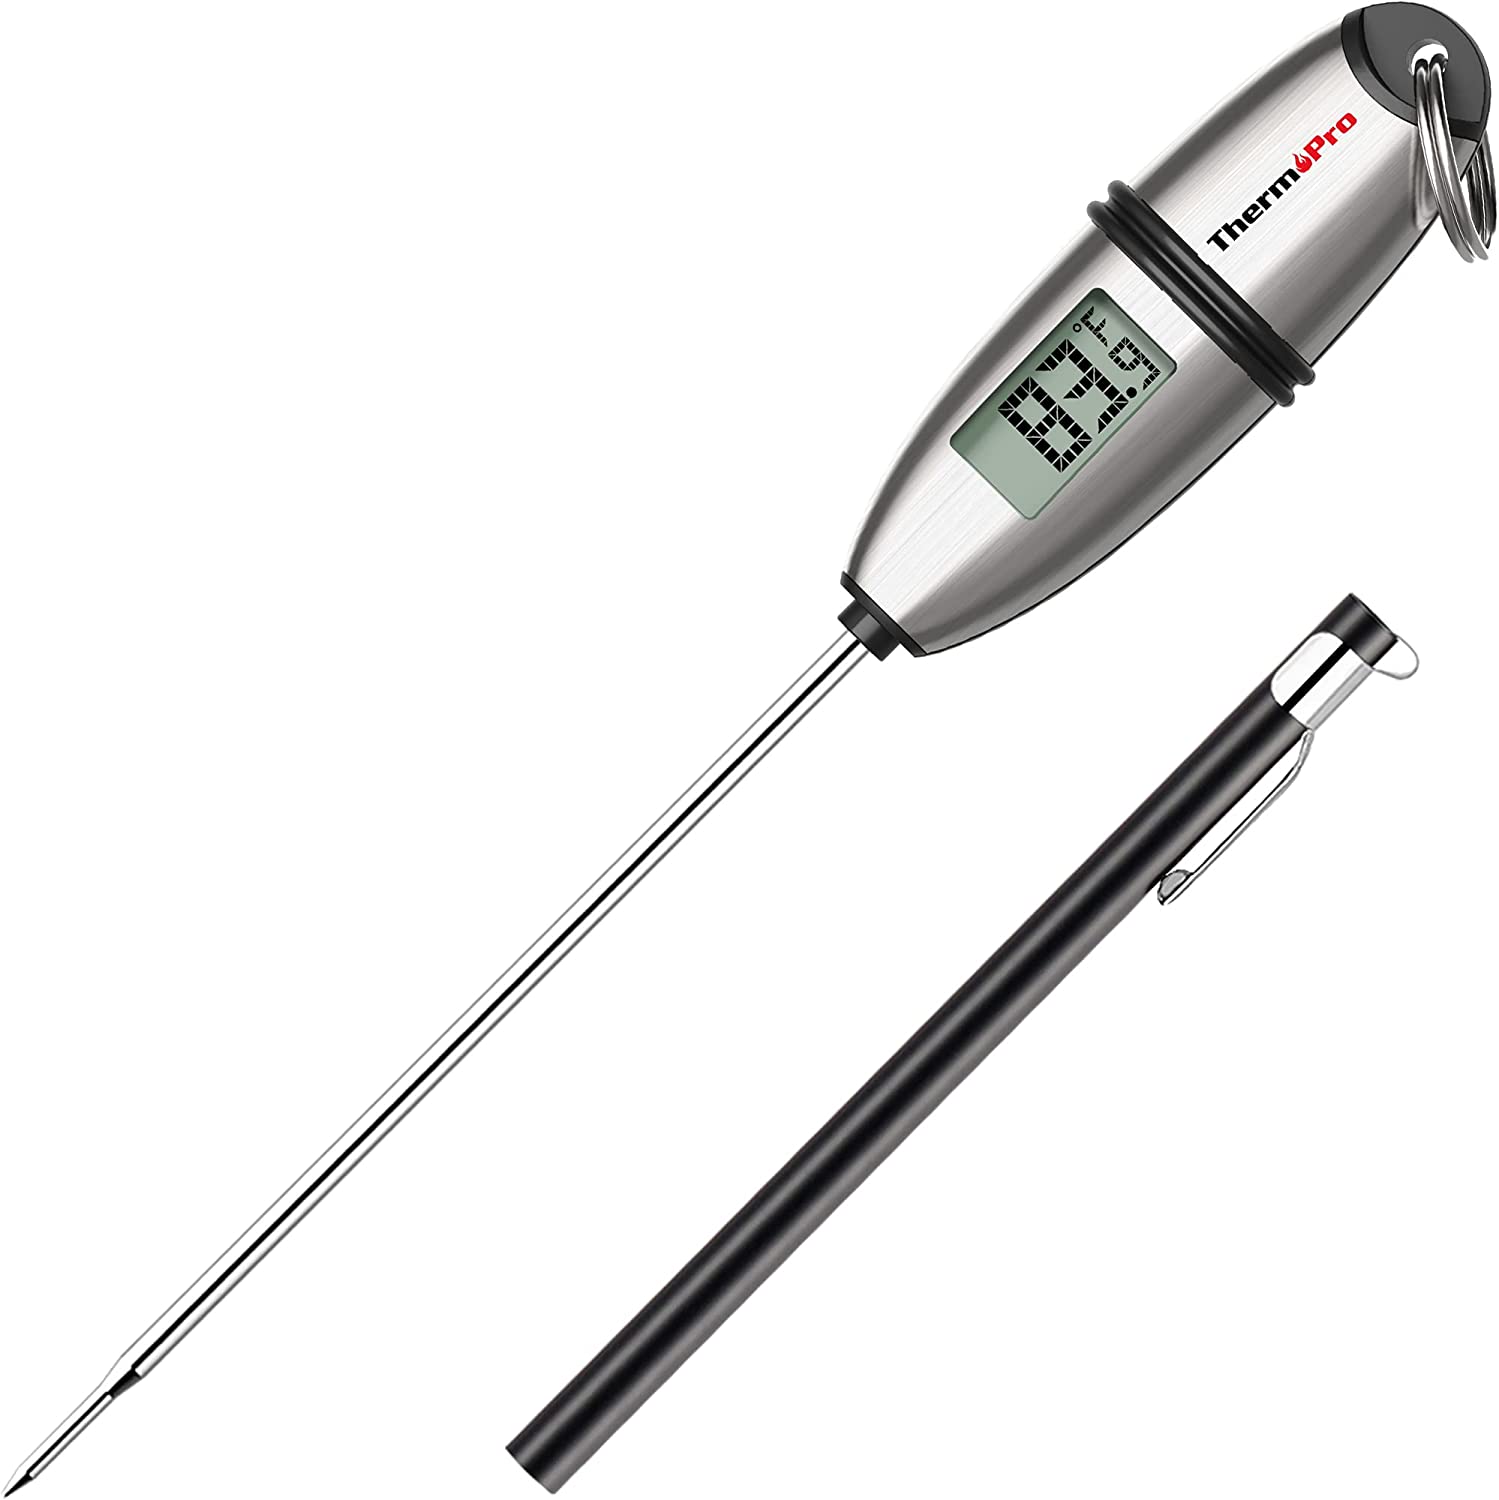 ThermoPro TP-02S Instant Read Meat Thermometer Digital [...]